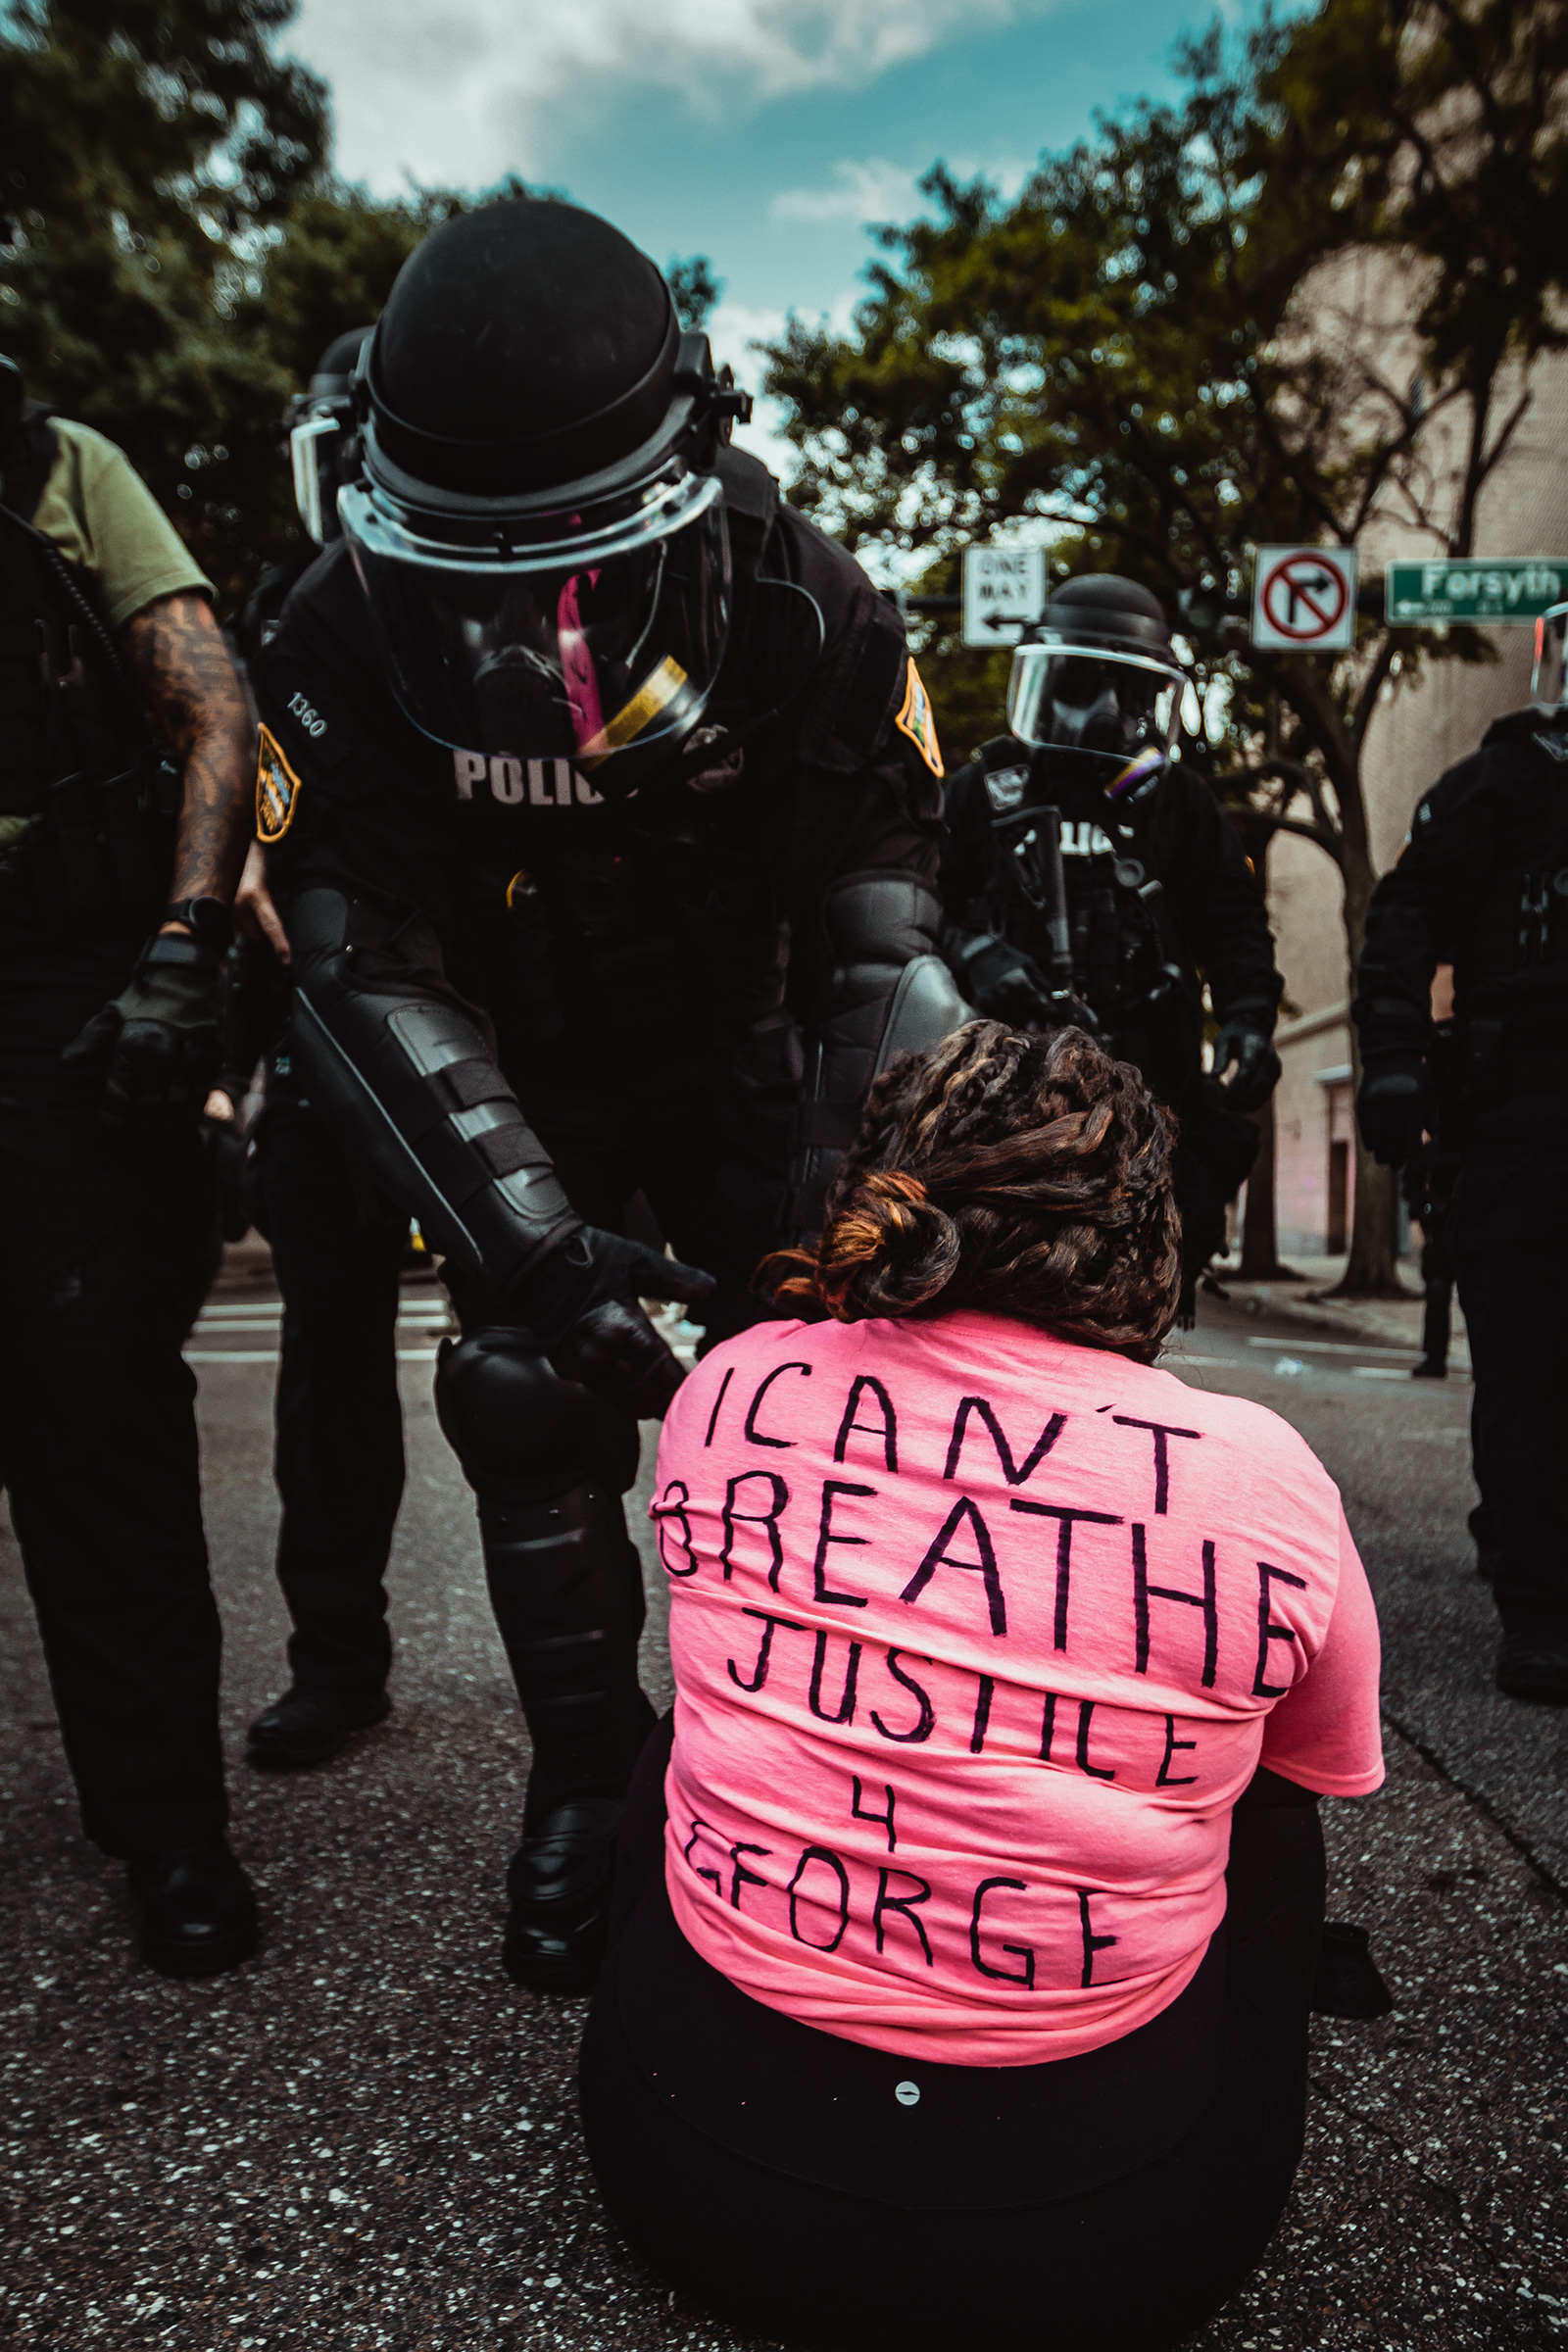 Police arrest Coricia Campbell during a Black Lives Matter protest in Jacksonville, Fla., on May 30. (Ashley N Whitmer)